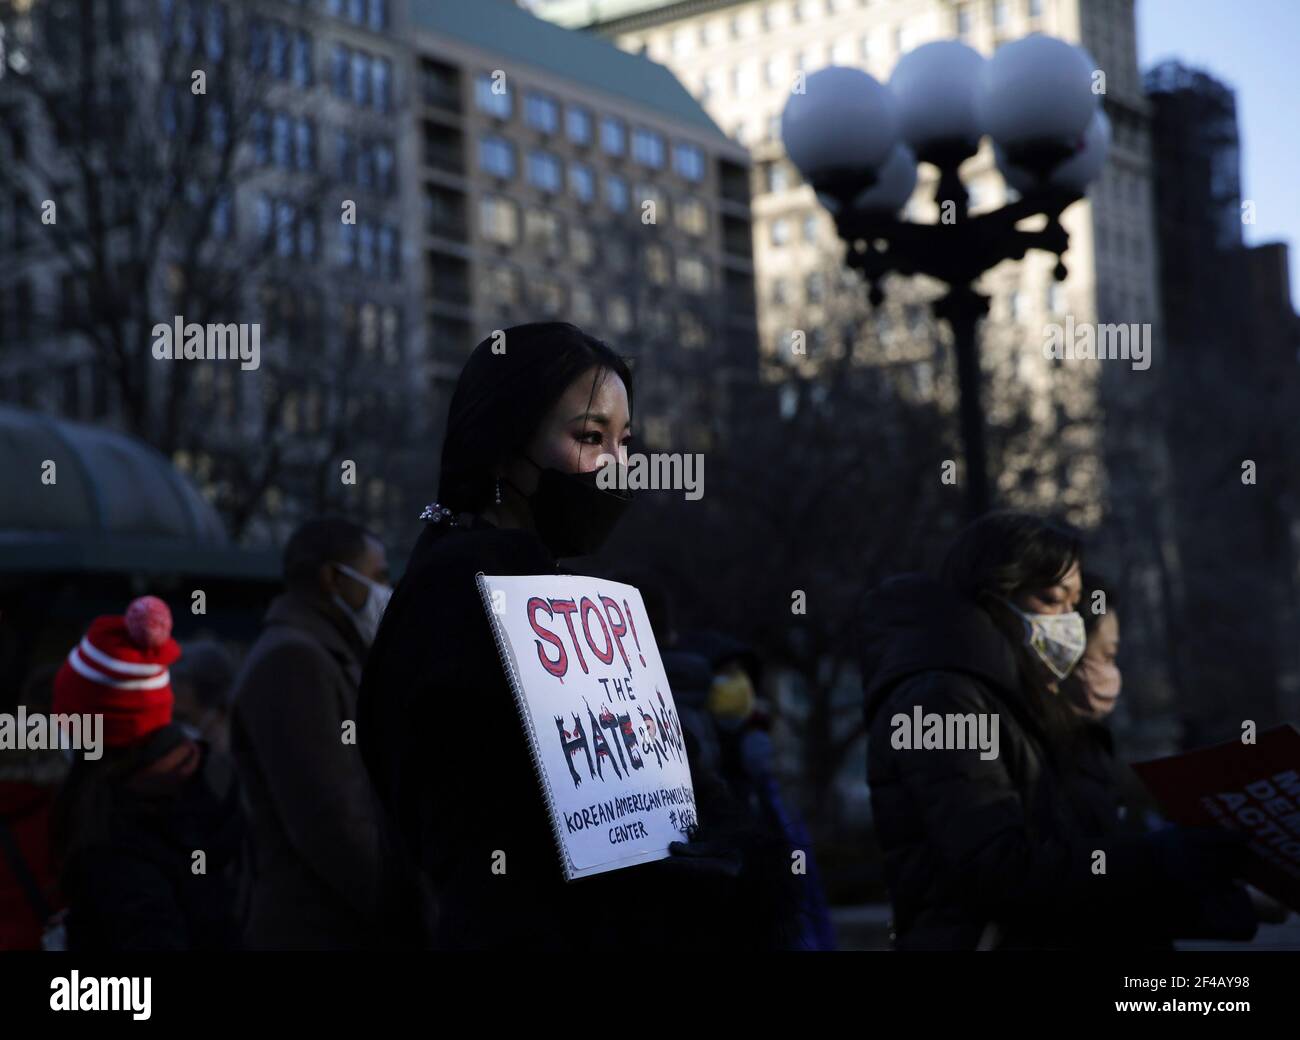 New York, United States. 19th Mar, 2021. People gather and hold signs at a Vigil for Peace organized by Asian American Federation in Union Square in New York City on Friday, March 19, 2021. President Biden on Friday urged Congress to pass hate crime legislation to address the increase in discrimination and violence against Asian Americans during the COVID-19 pandemic. Photo by John Angelillo/UPI Credit: UPI/Alamy Live News Stock Photo